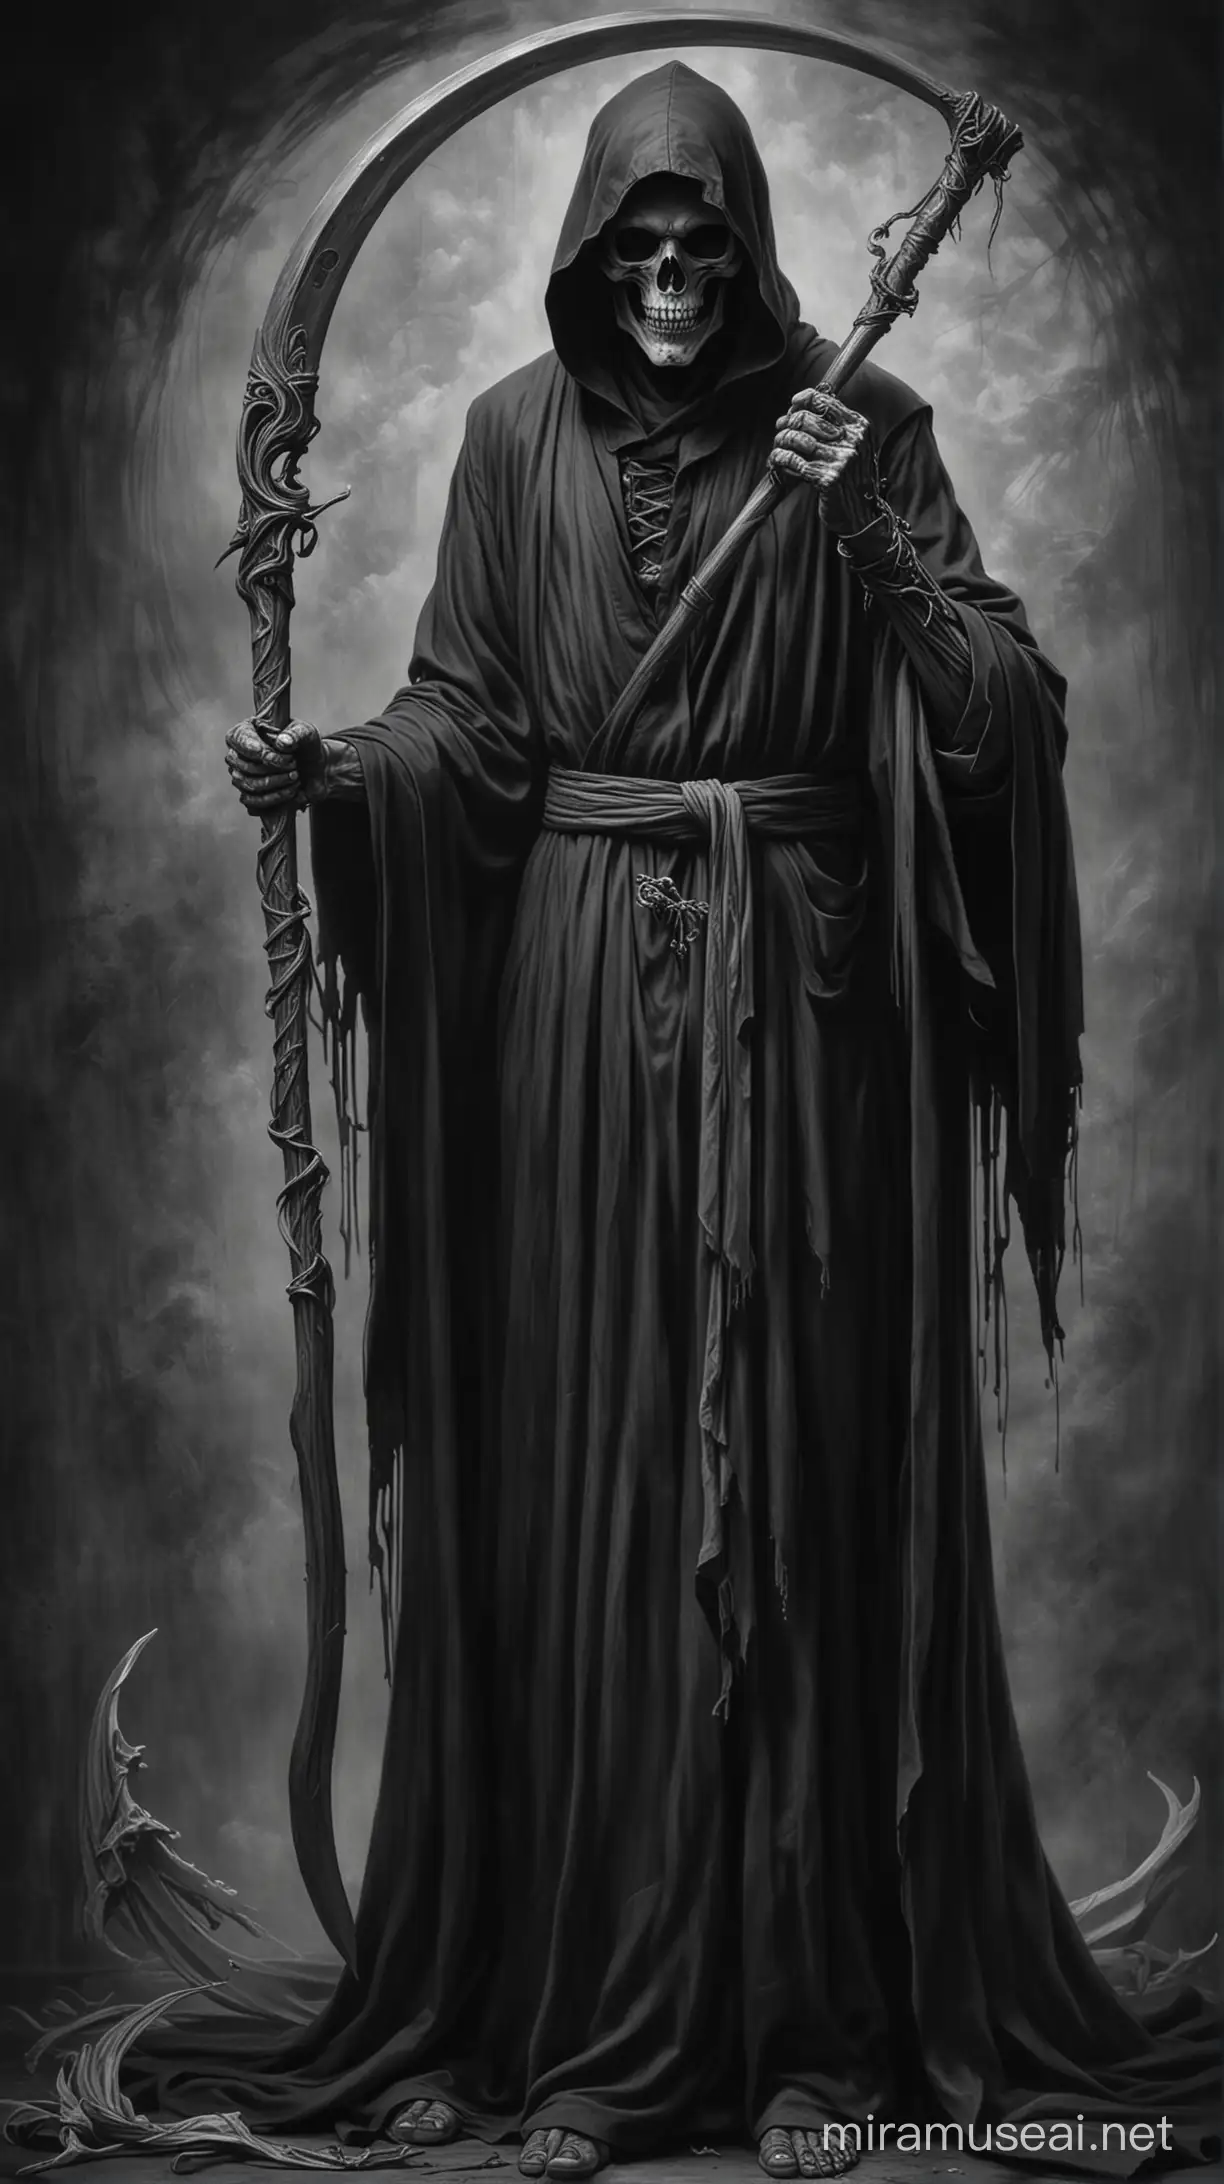 Grim Reaper Realism Drawing with Scythe and Scroll in Black Robe